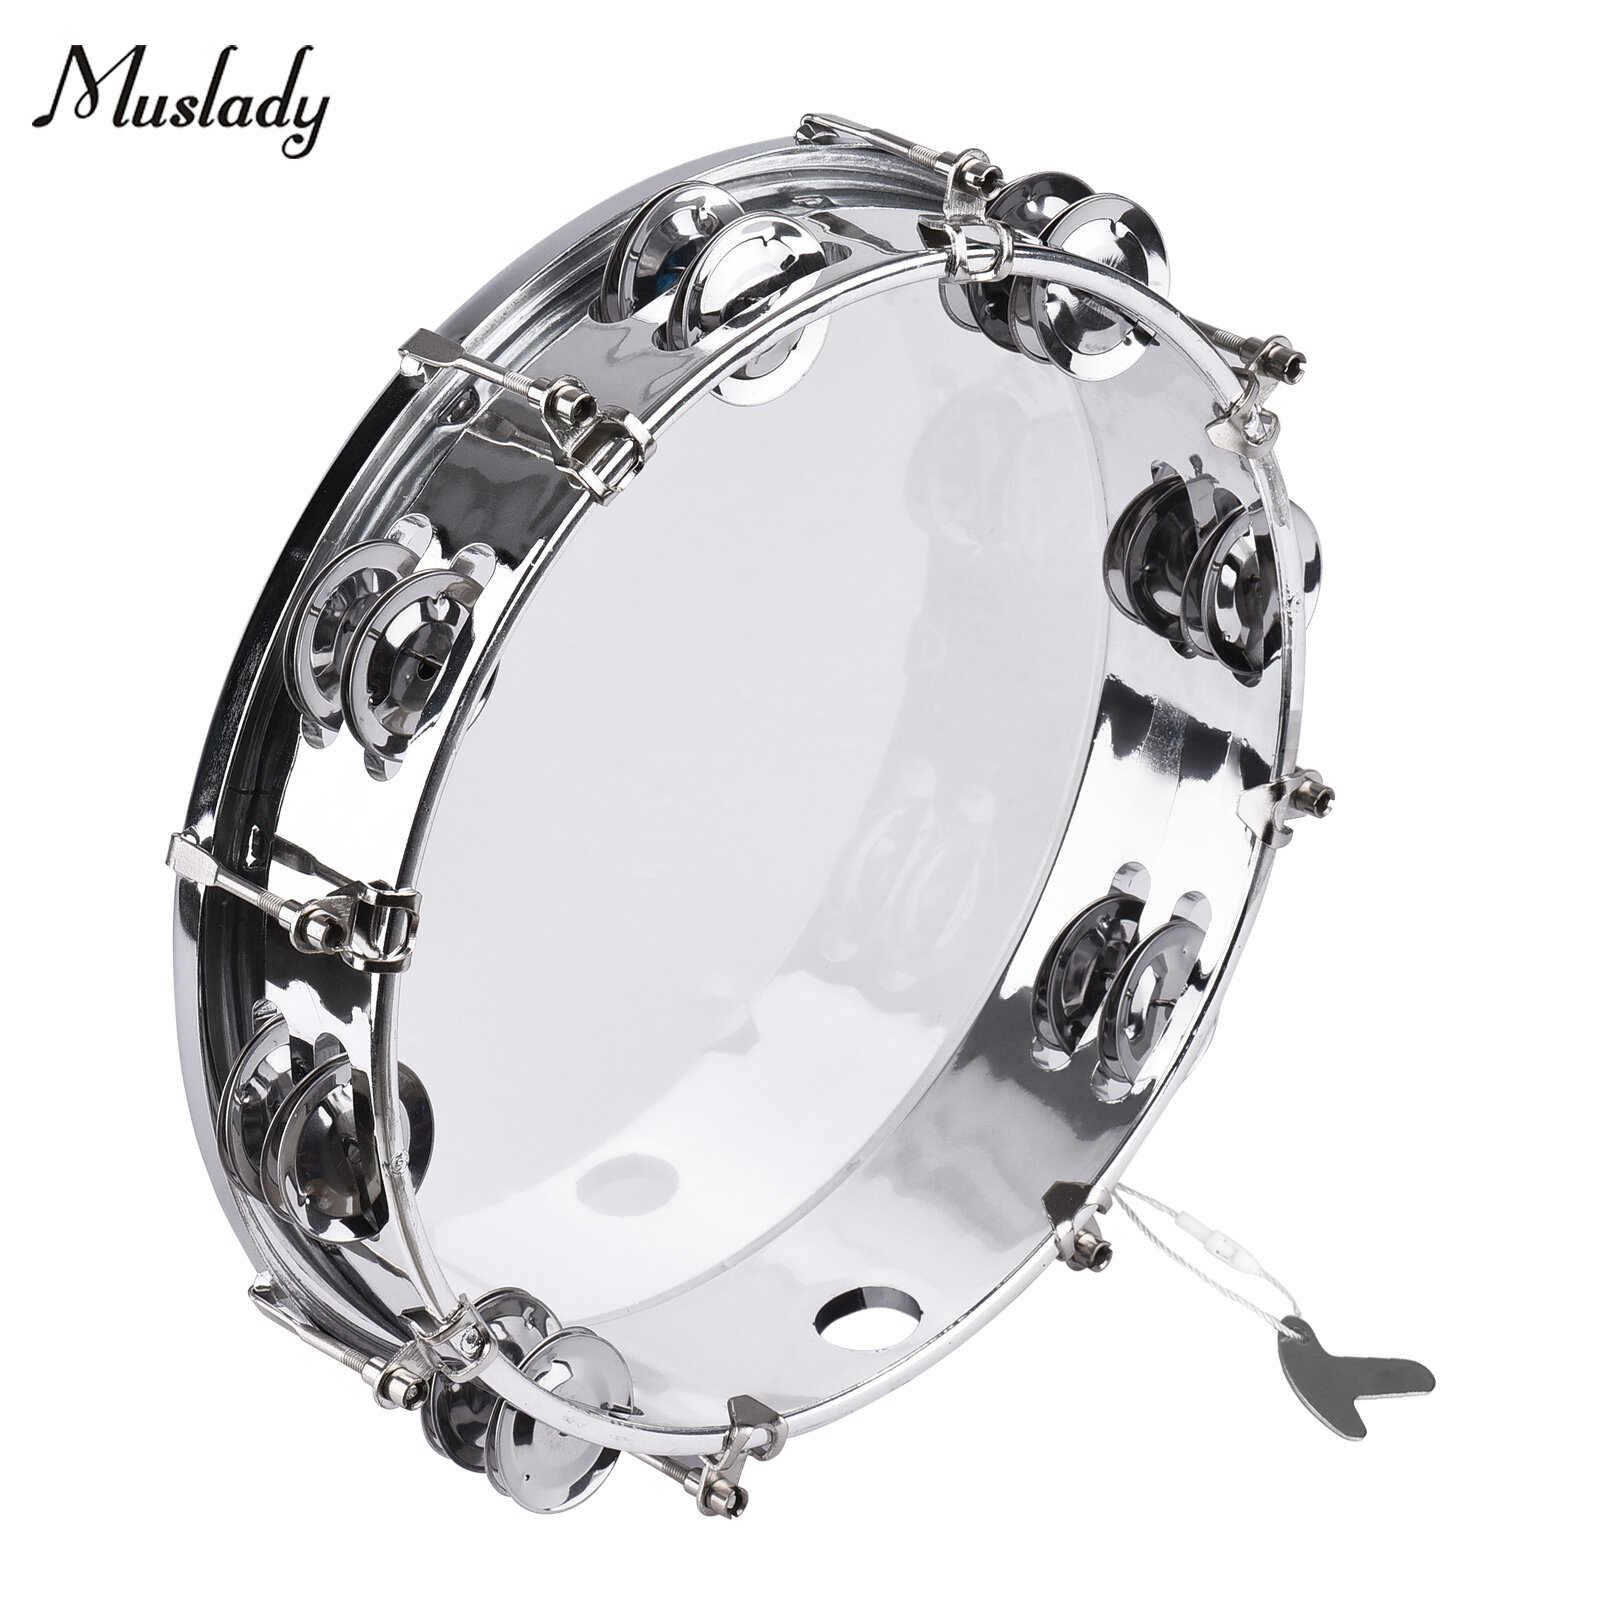 Muslady 10 8-inch Tambourine Handbell Hand Drum with Double Row Jingles